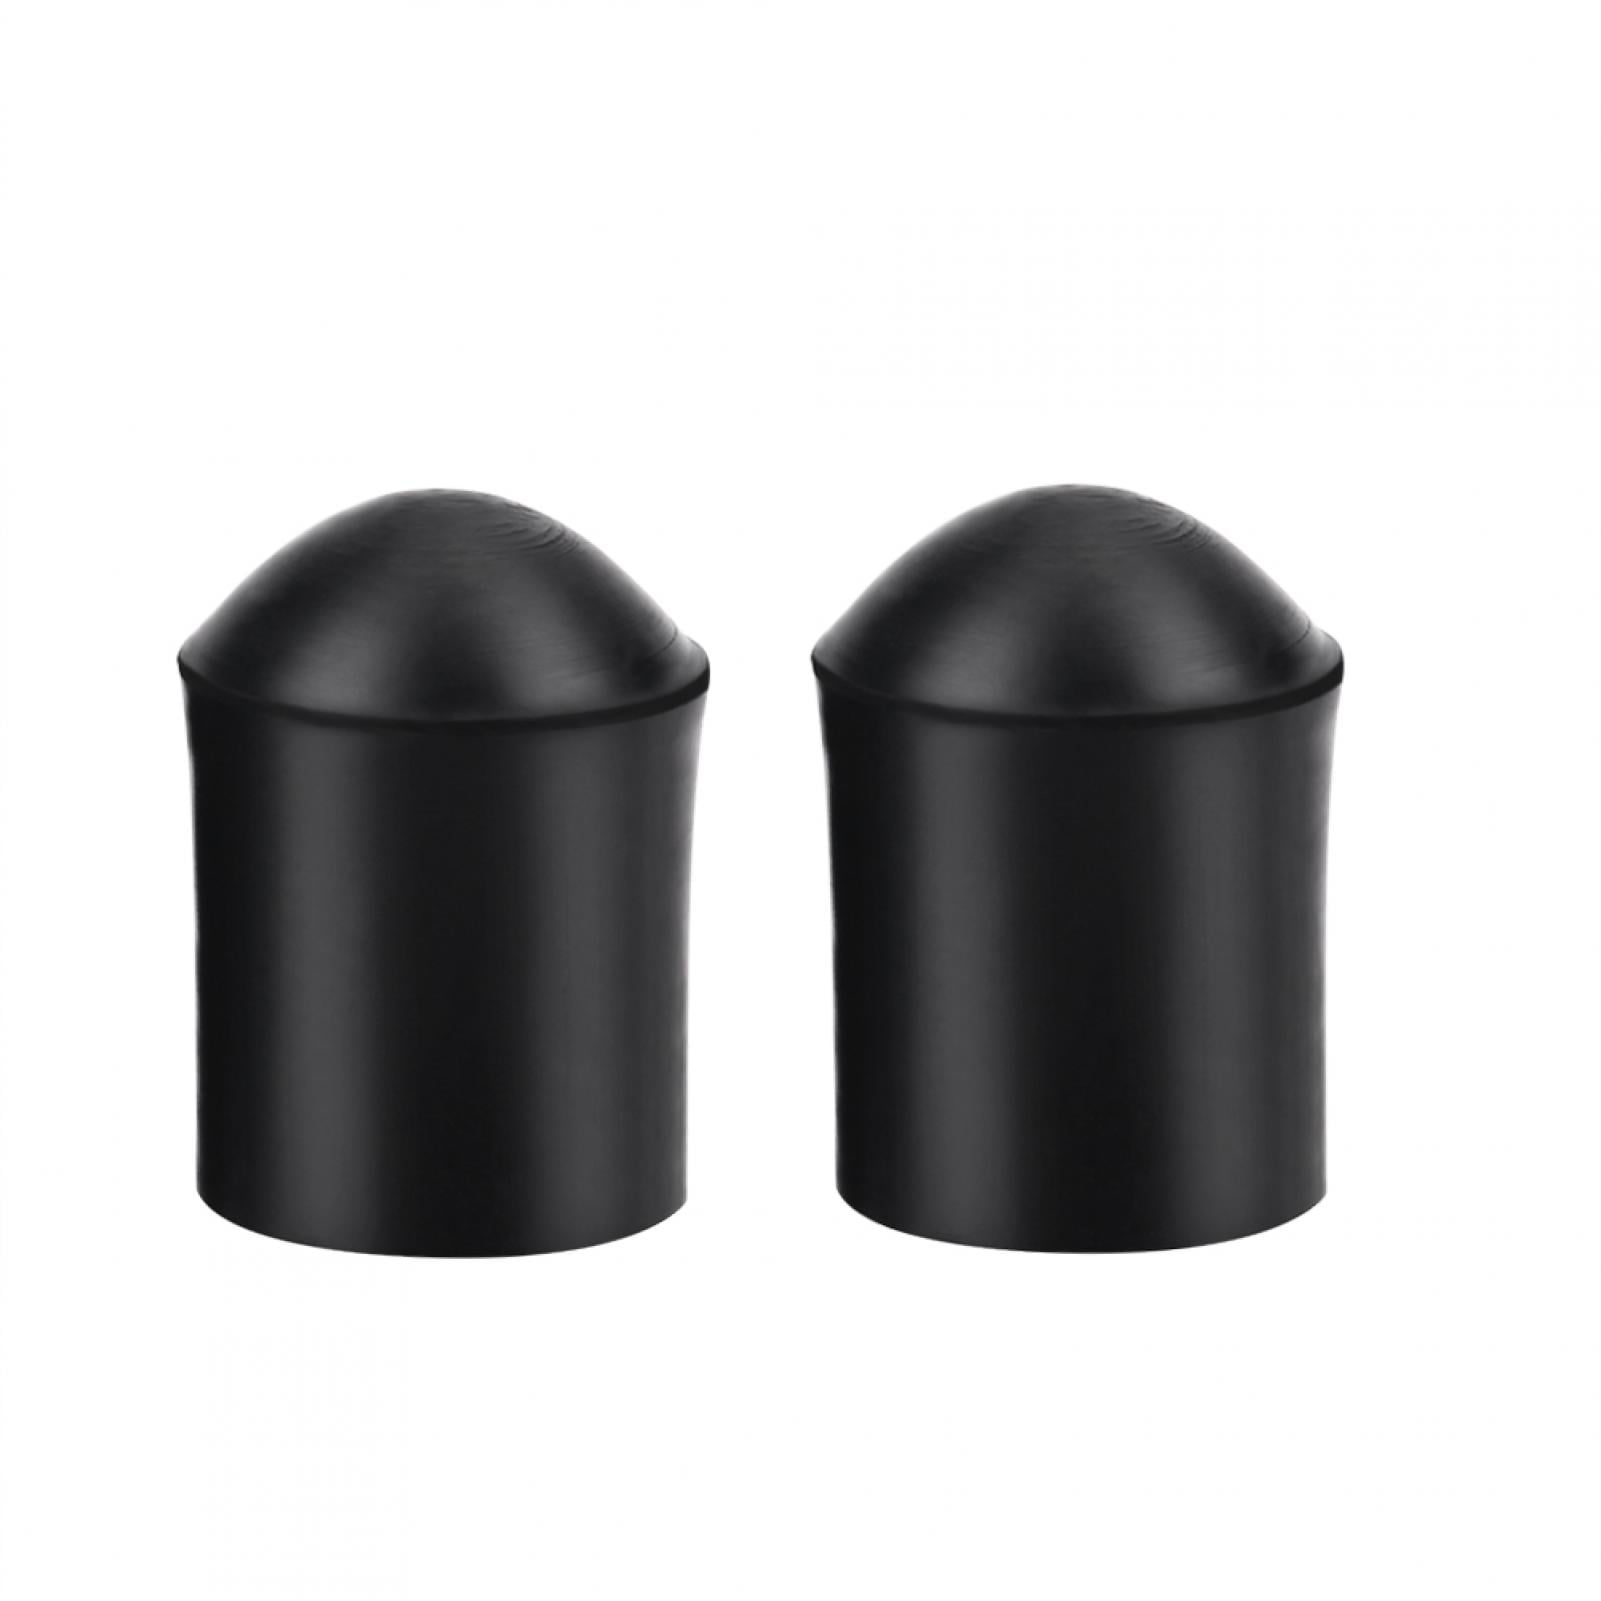 2pcs Double Bass Endpin Rubber Tip Stopper Black Protector End Cap Accessory Double Bass Endpin Protector 